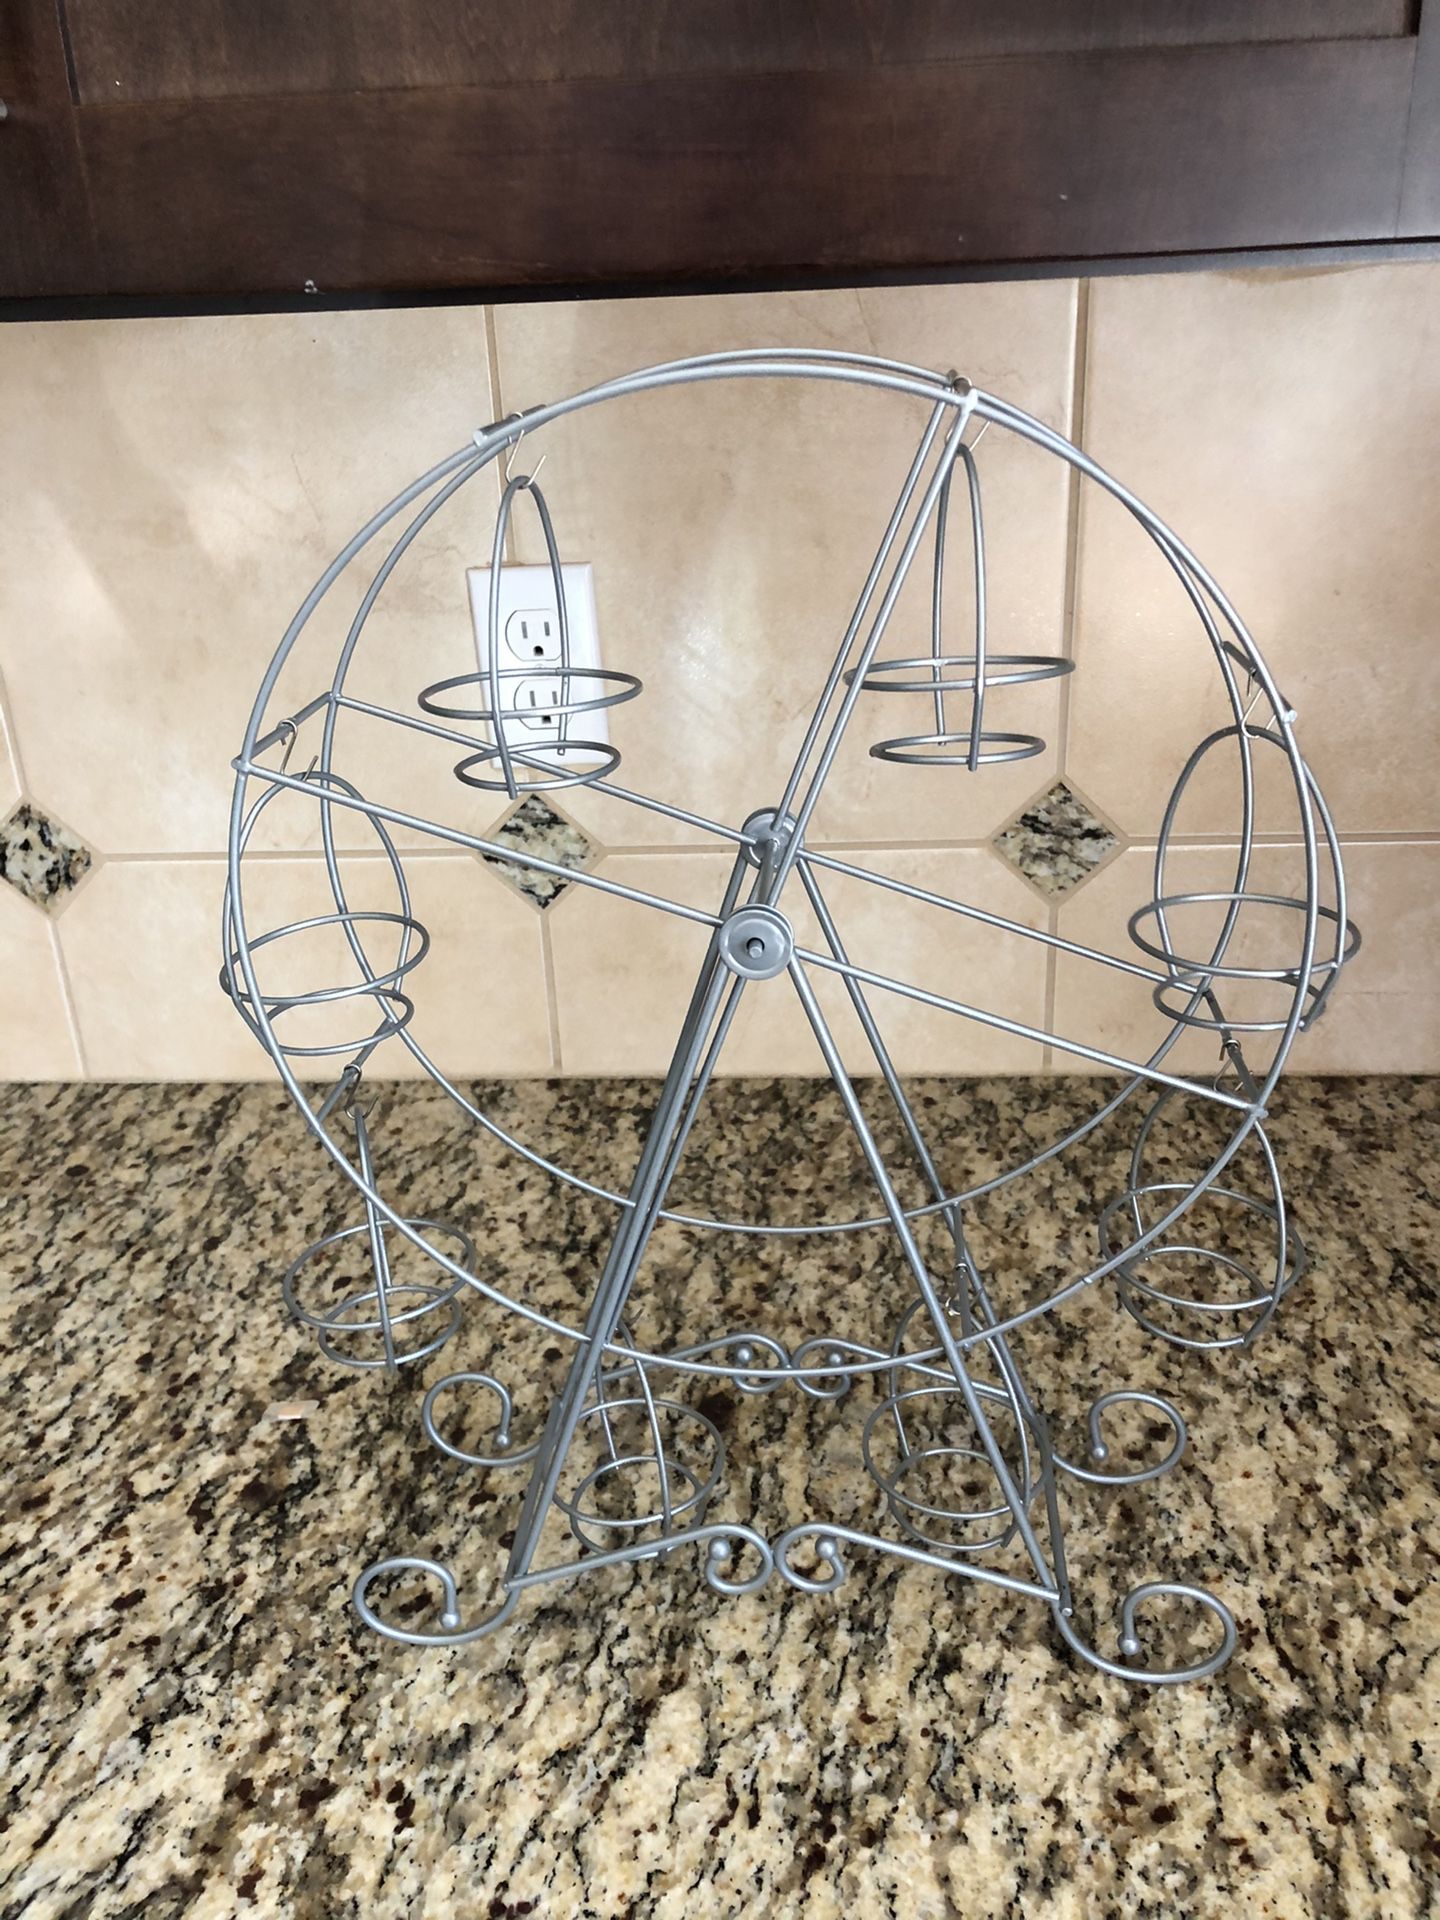 Carousel cupcake stand for parties, used once